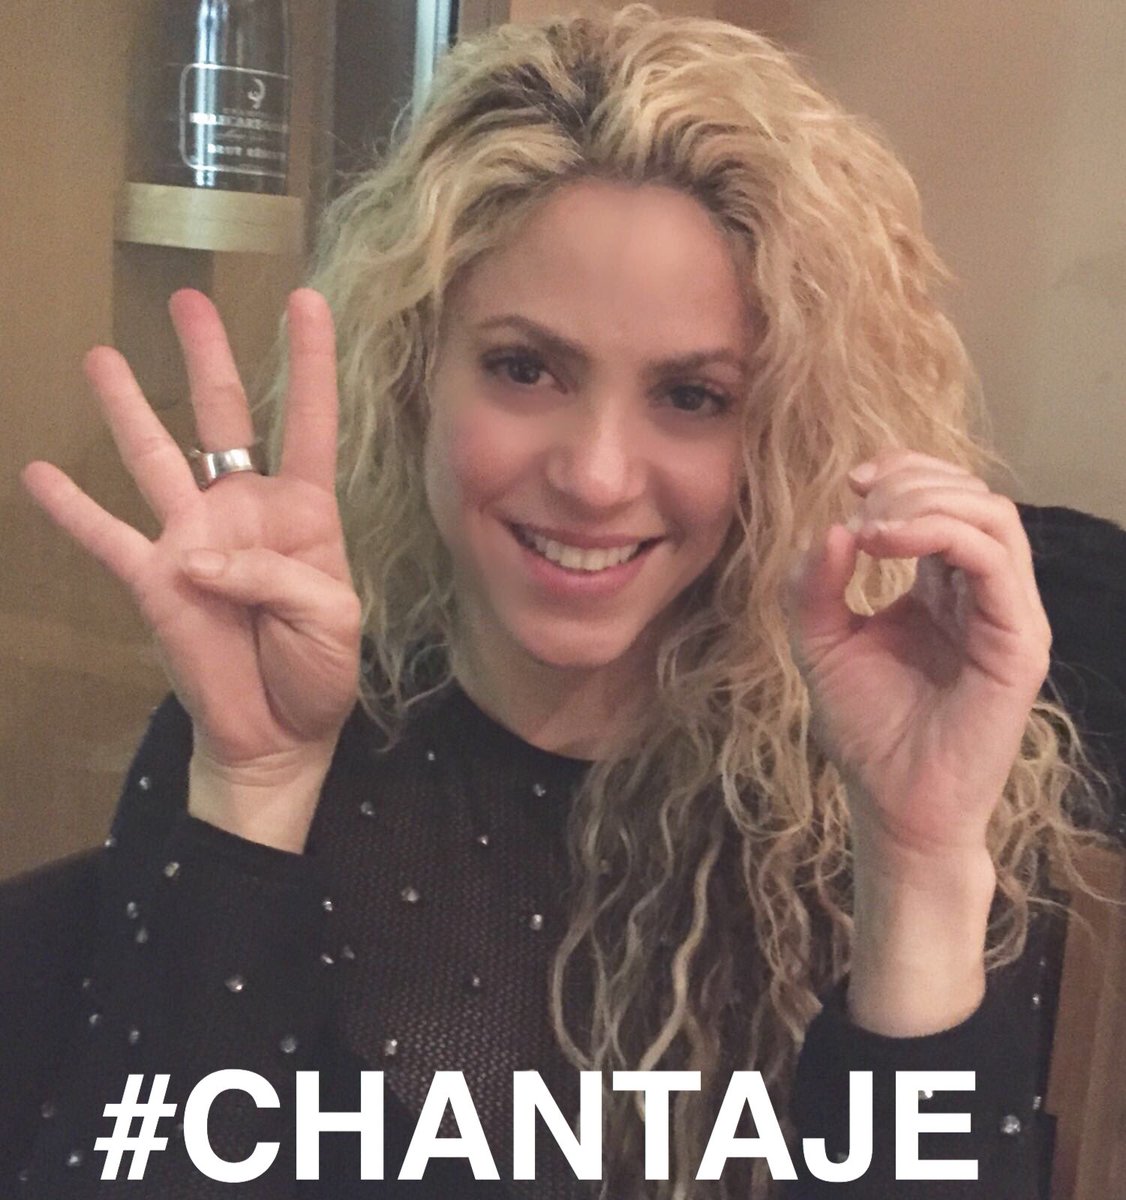 40 million views on the #Chantaje vid in only 10 days! Incredible, thank you all for making my day! Shak https://t.co/SrtaWMPkbl